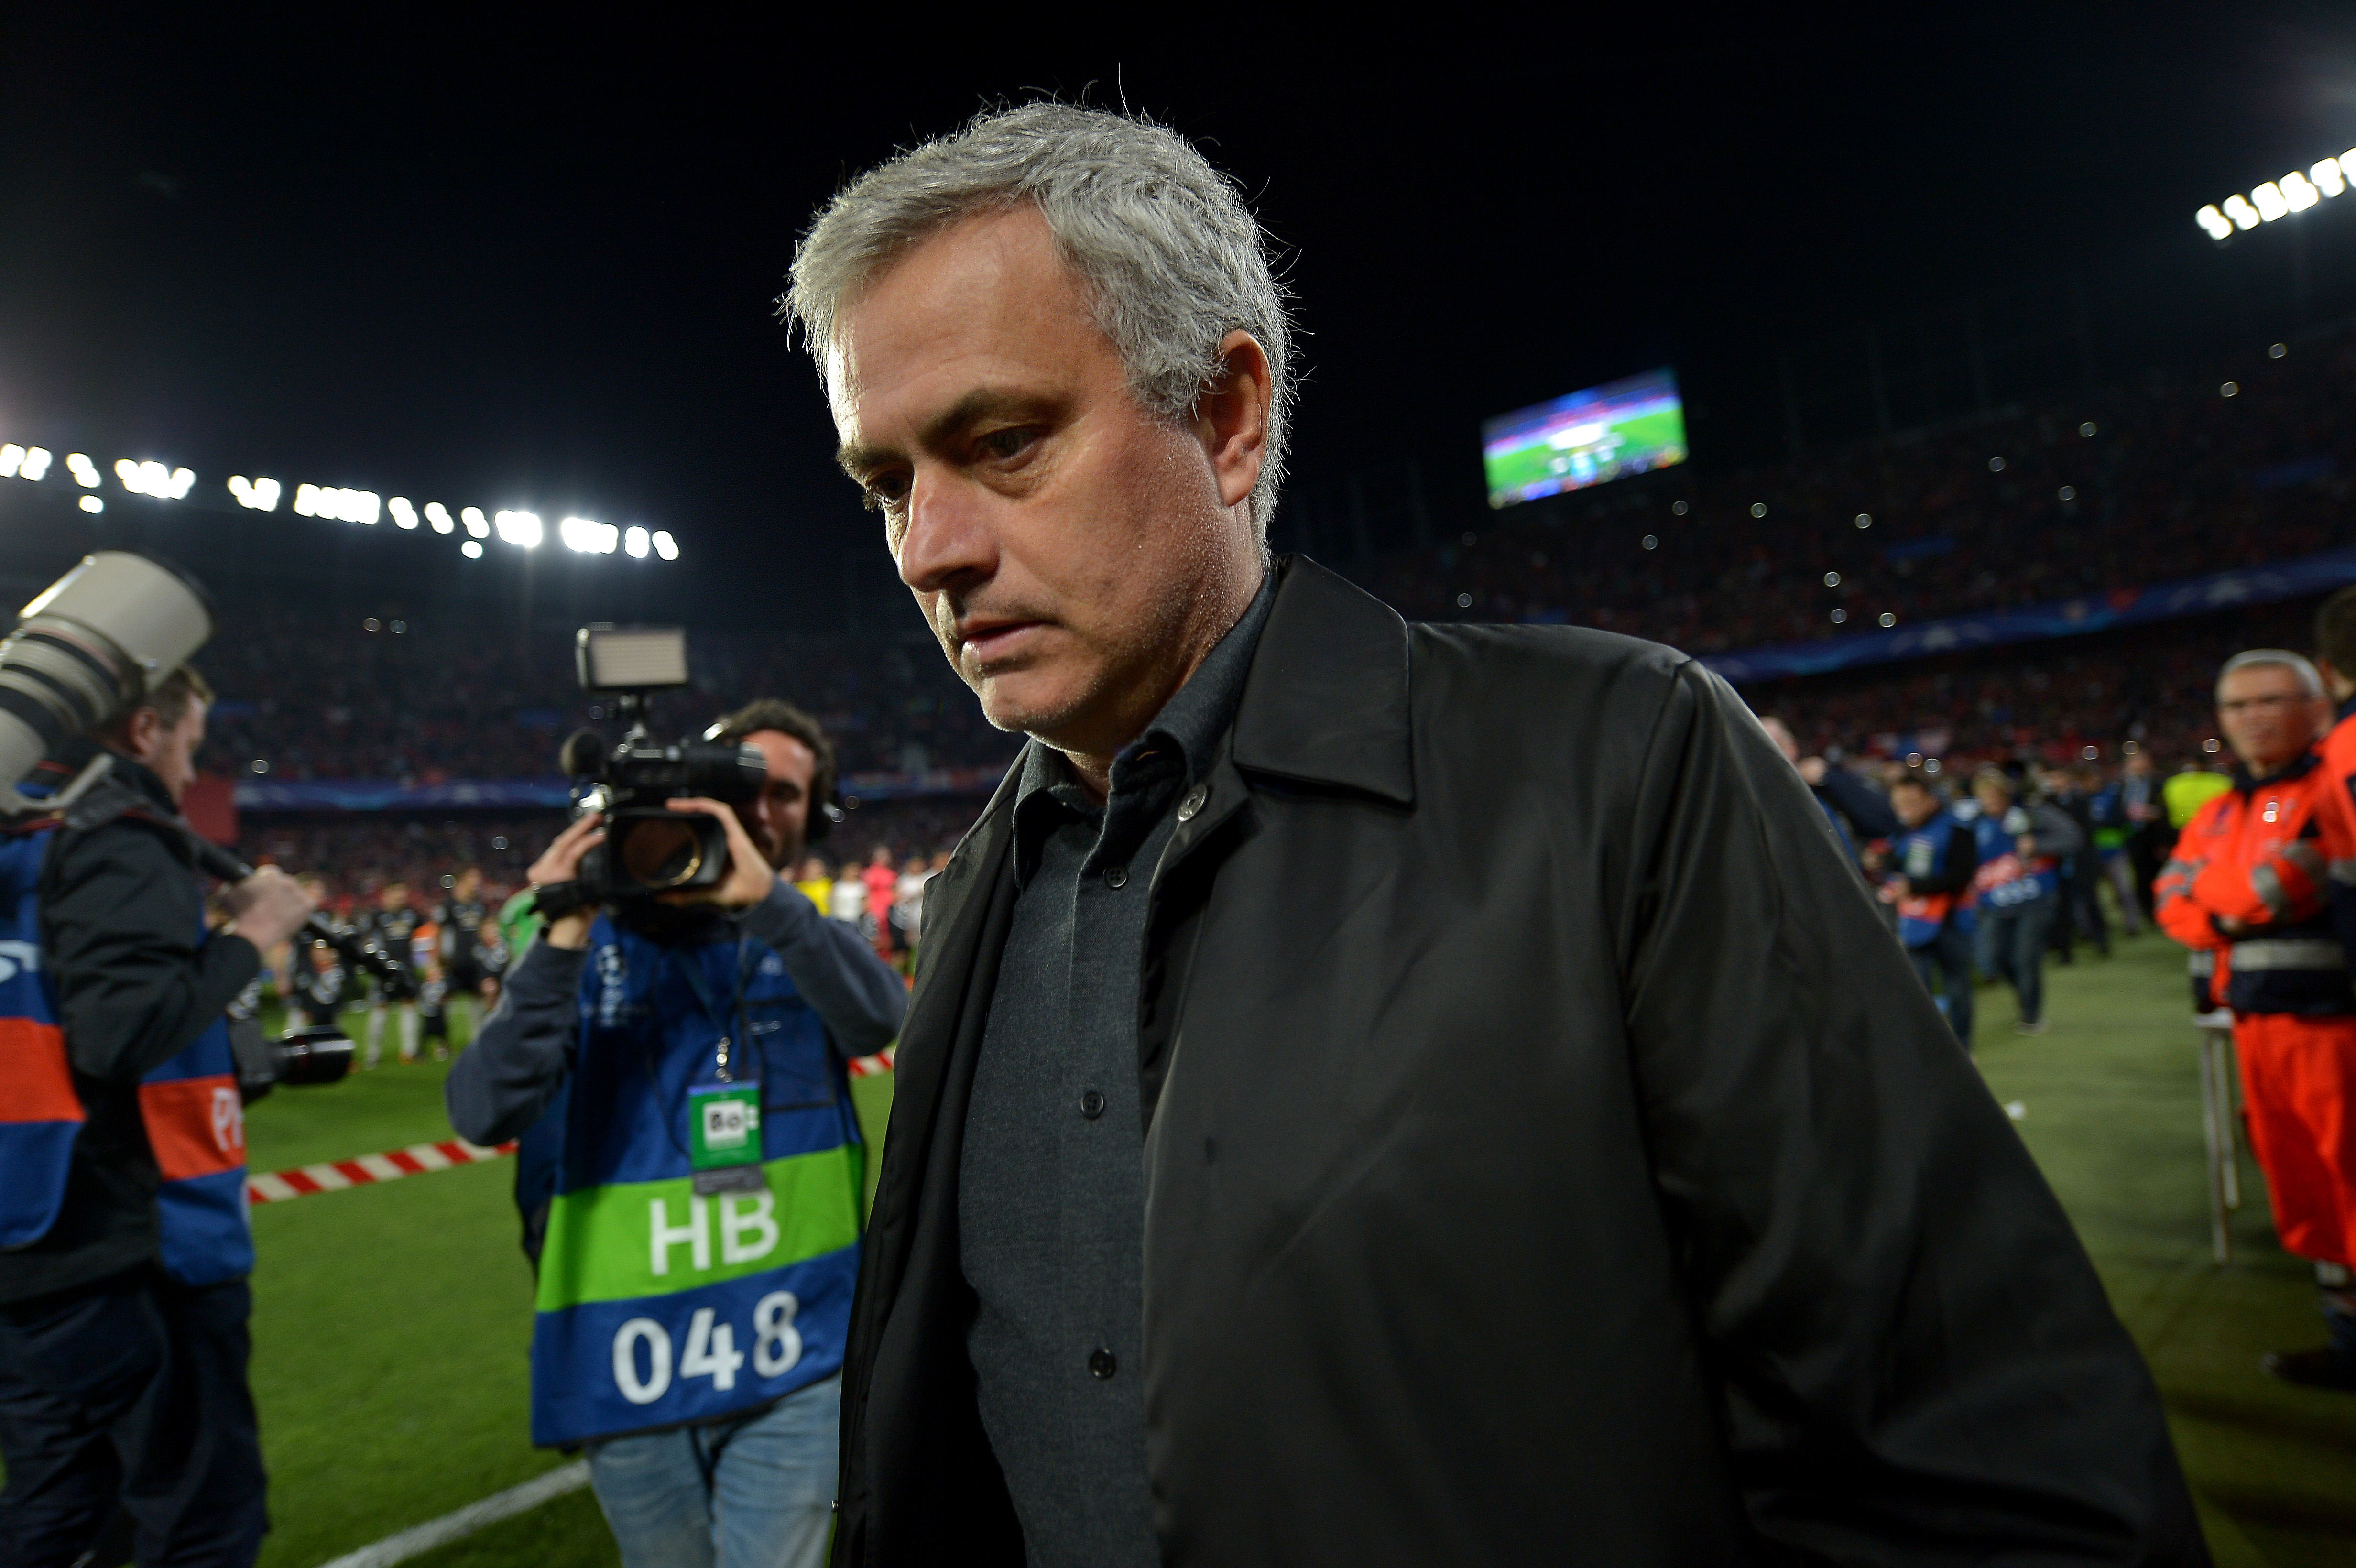 SEVILLE, SPAIN - FEBRUARY 21: Jose Mourinho, Manager of Manchester United looks on during the UEFA Champions League Round of 16 First Leg match between Sevilla FC and Manchester United at Estadio Ramon Sanchez Pizjuan on February 21, 2018 in Seville, Spain.  (Photo by Aitor Alcalde/Getty Images)